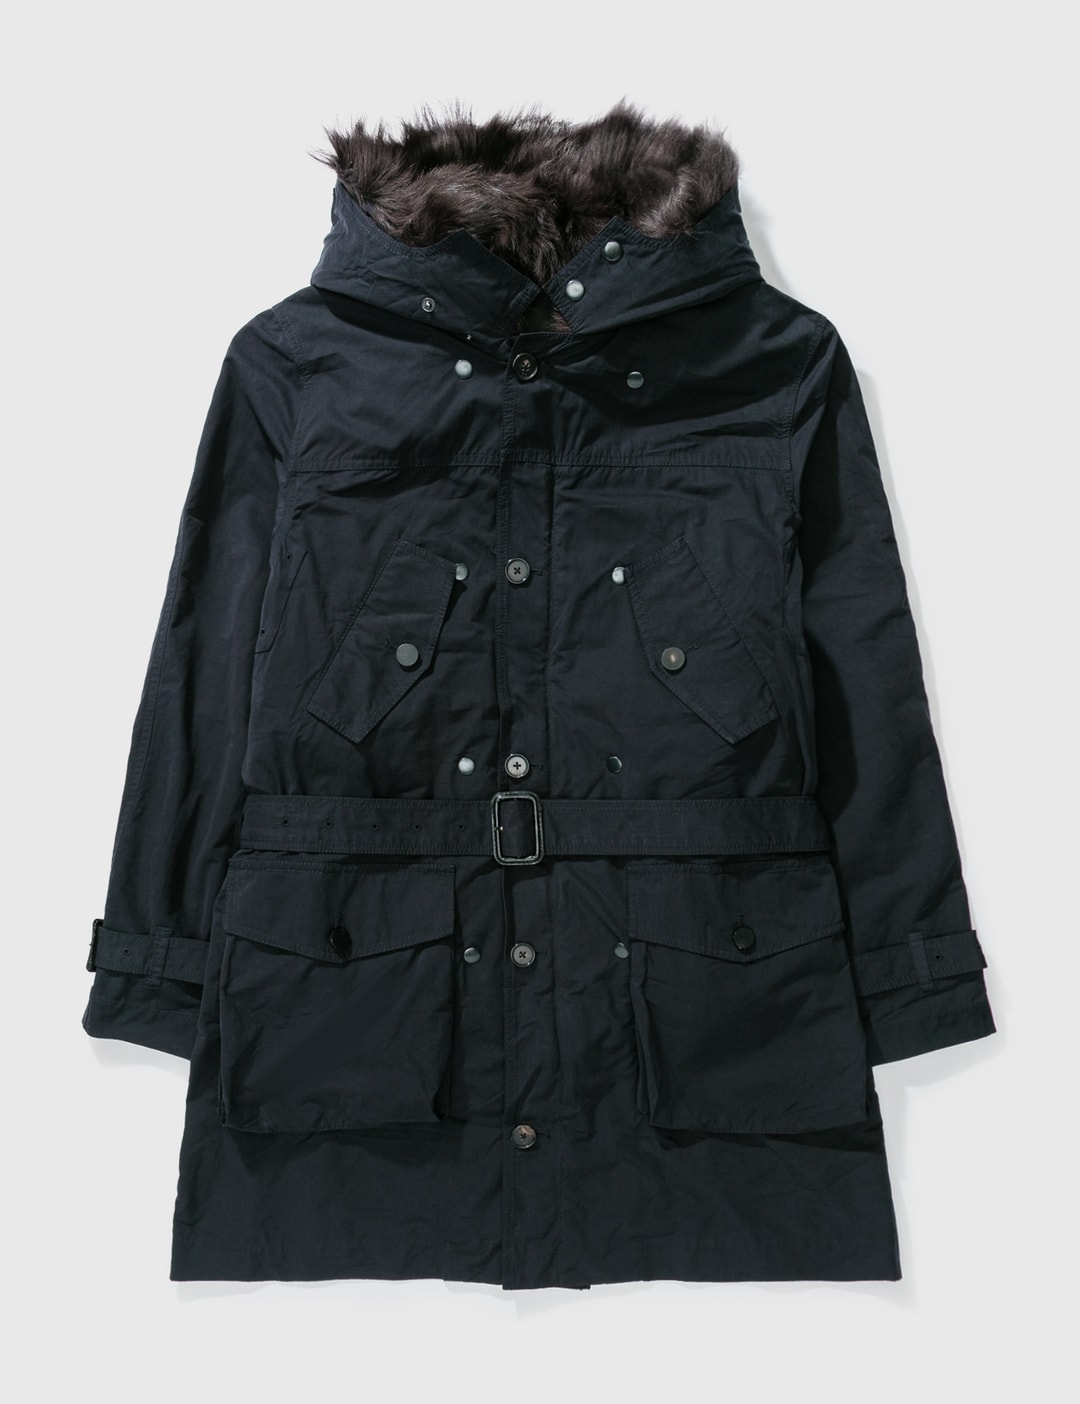 PHILLIP LIM FUR LINED TRENCH COAT Placeholder Image